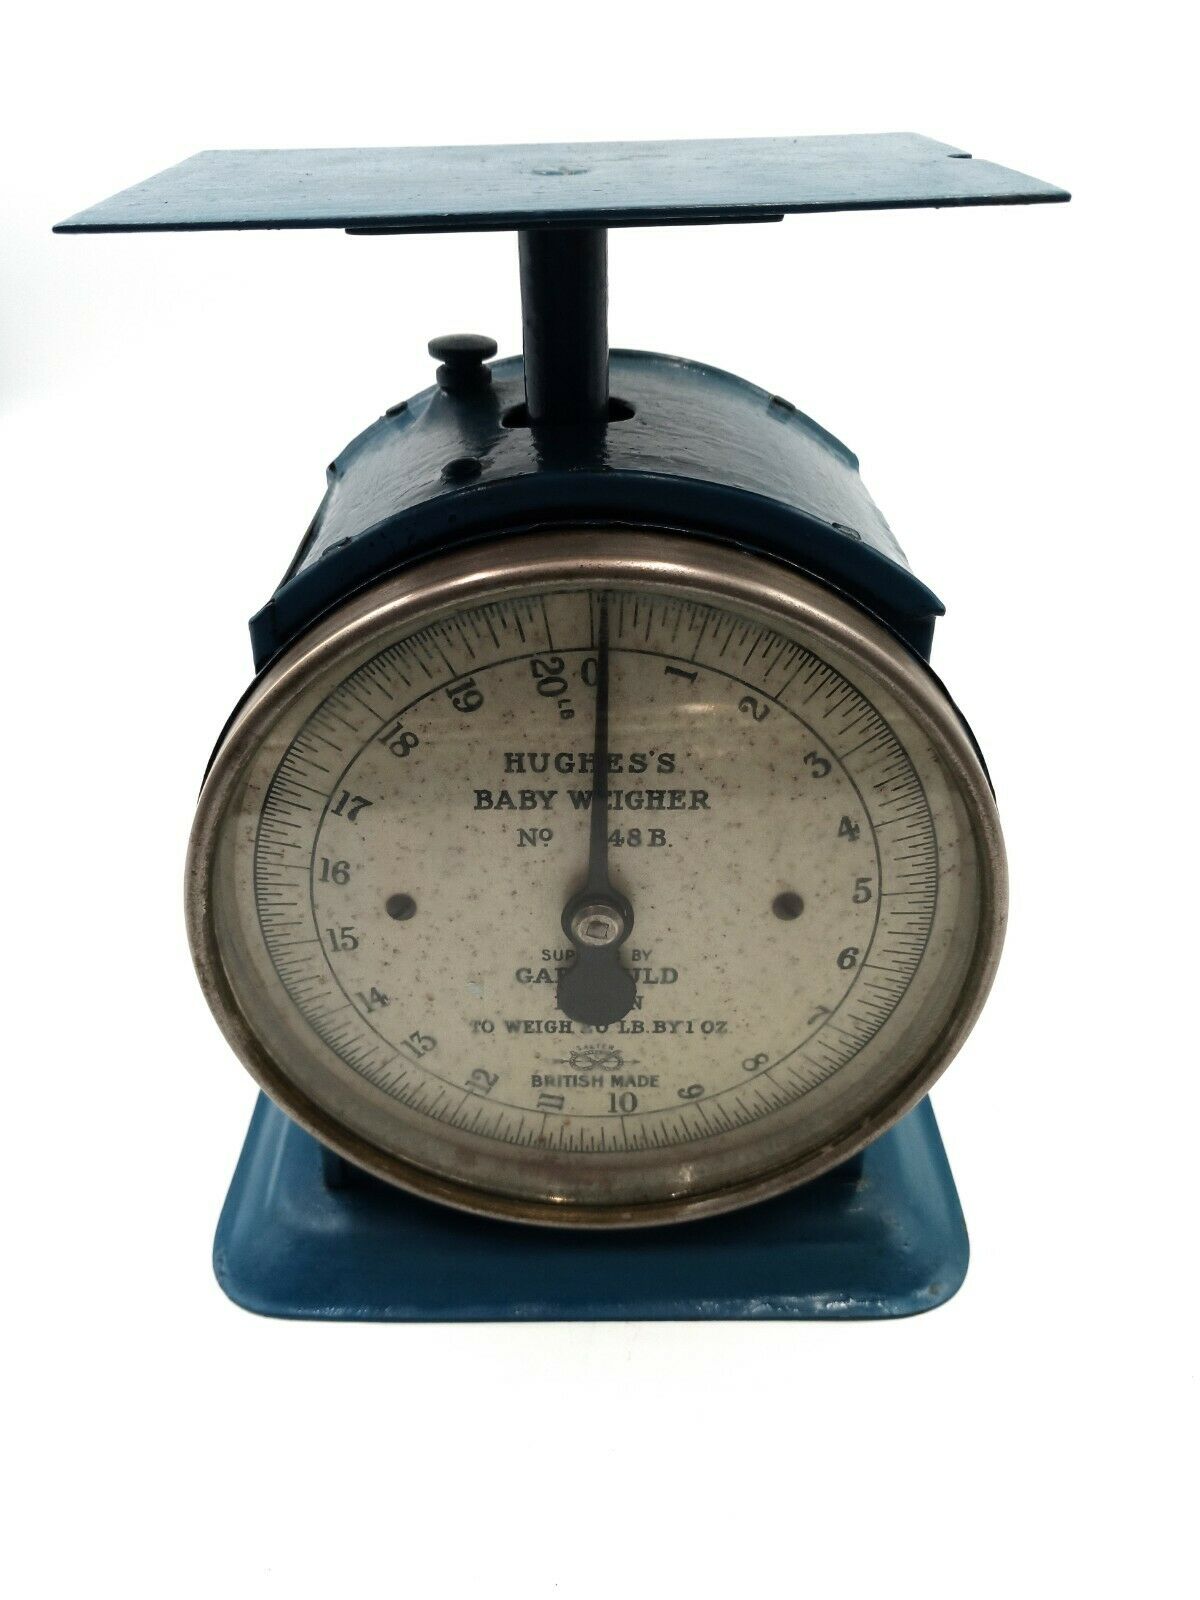 Sold Vintage Hughes Baby Weigher Painted Cast Iron Scales By Salter M White Cat Collectables